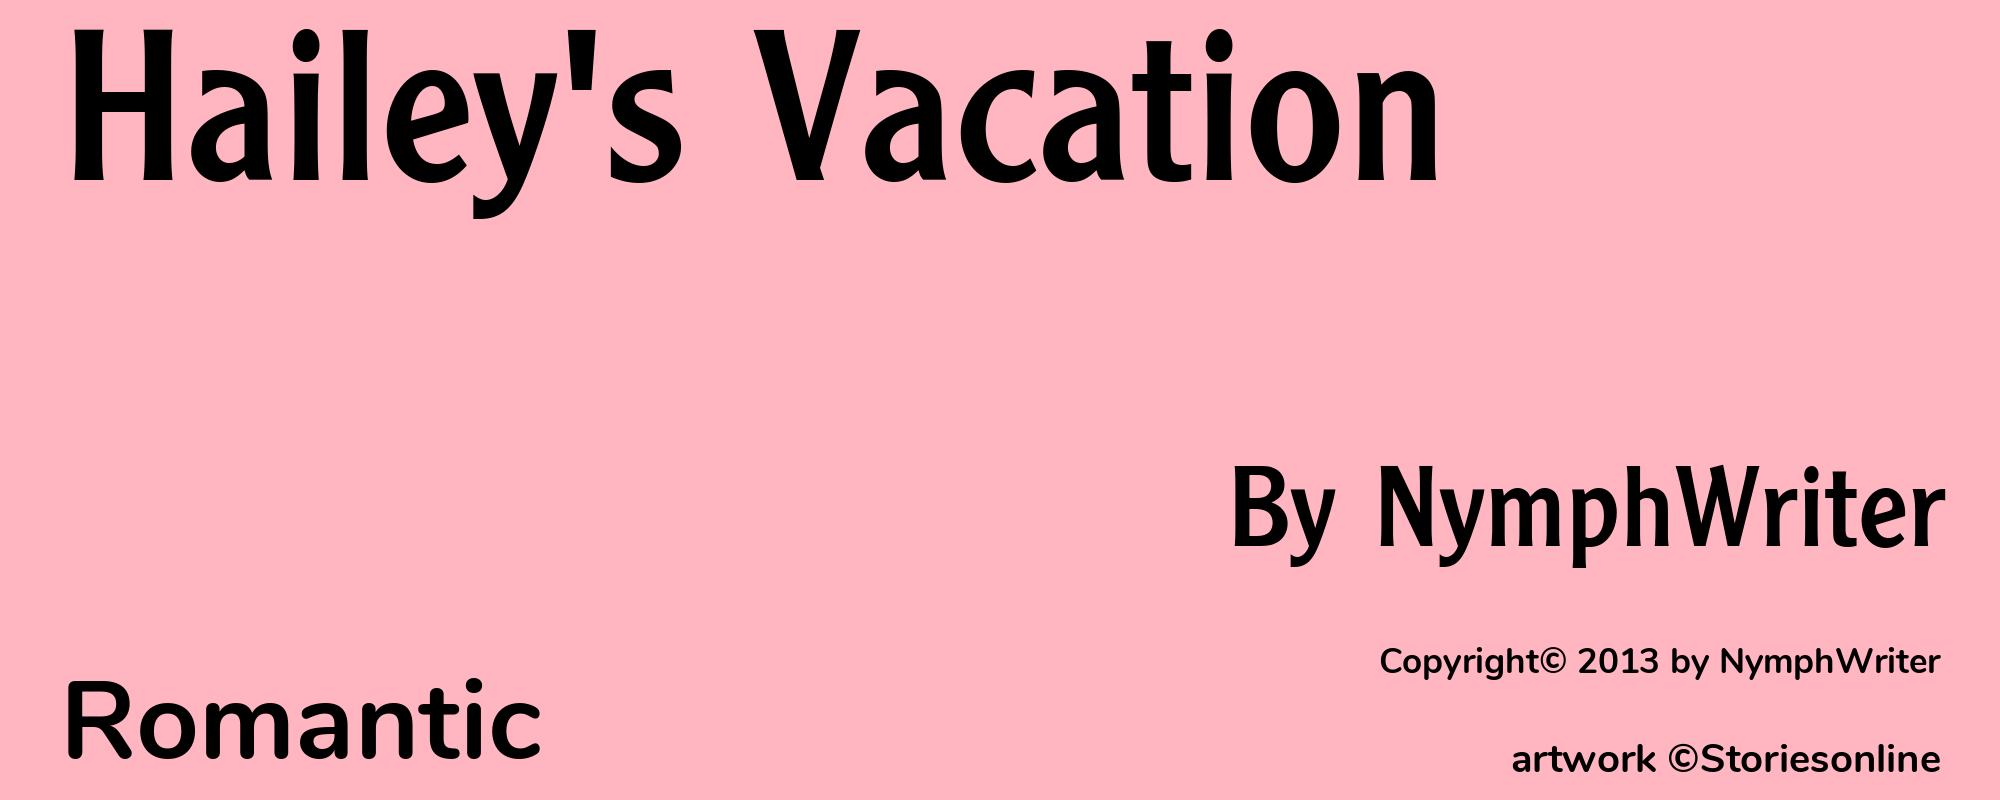 Hailey's Vacation - Cover